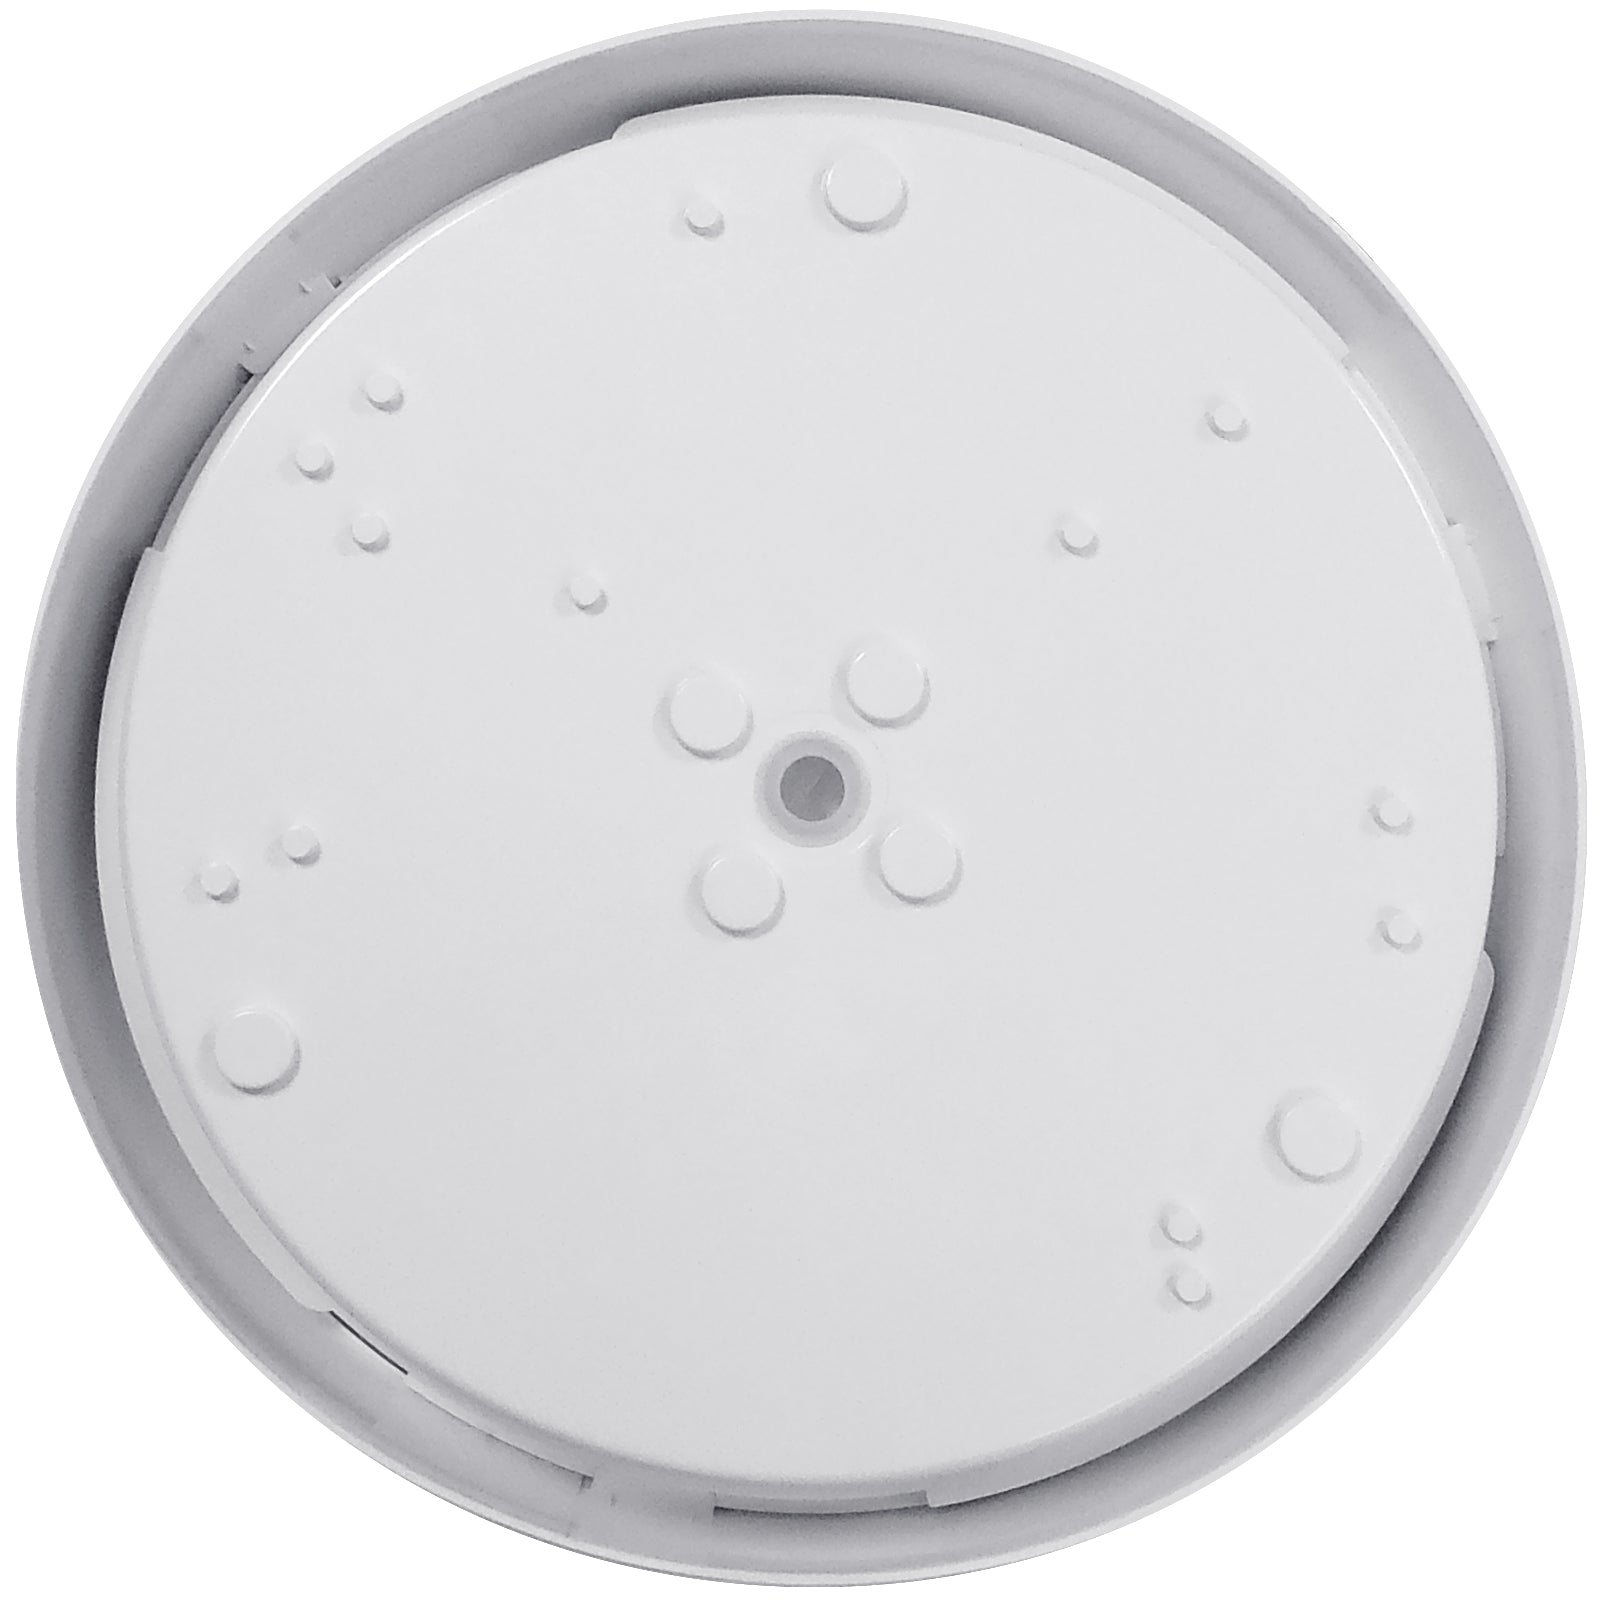 Eterna KCIRSTD 14W CT Selectable Circular LED Ceiling/Wall Light White